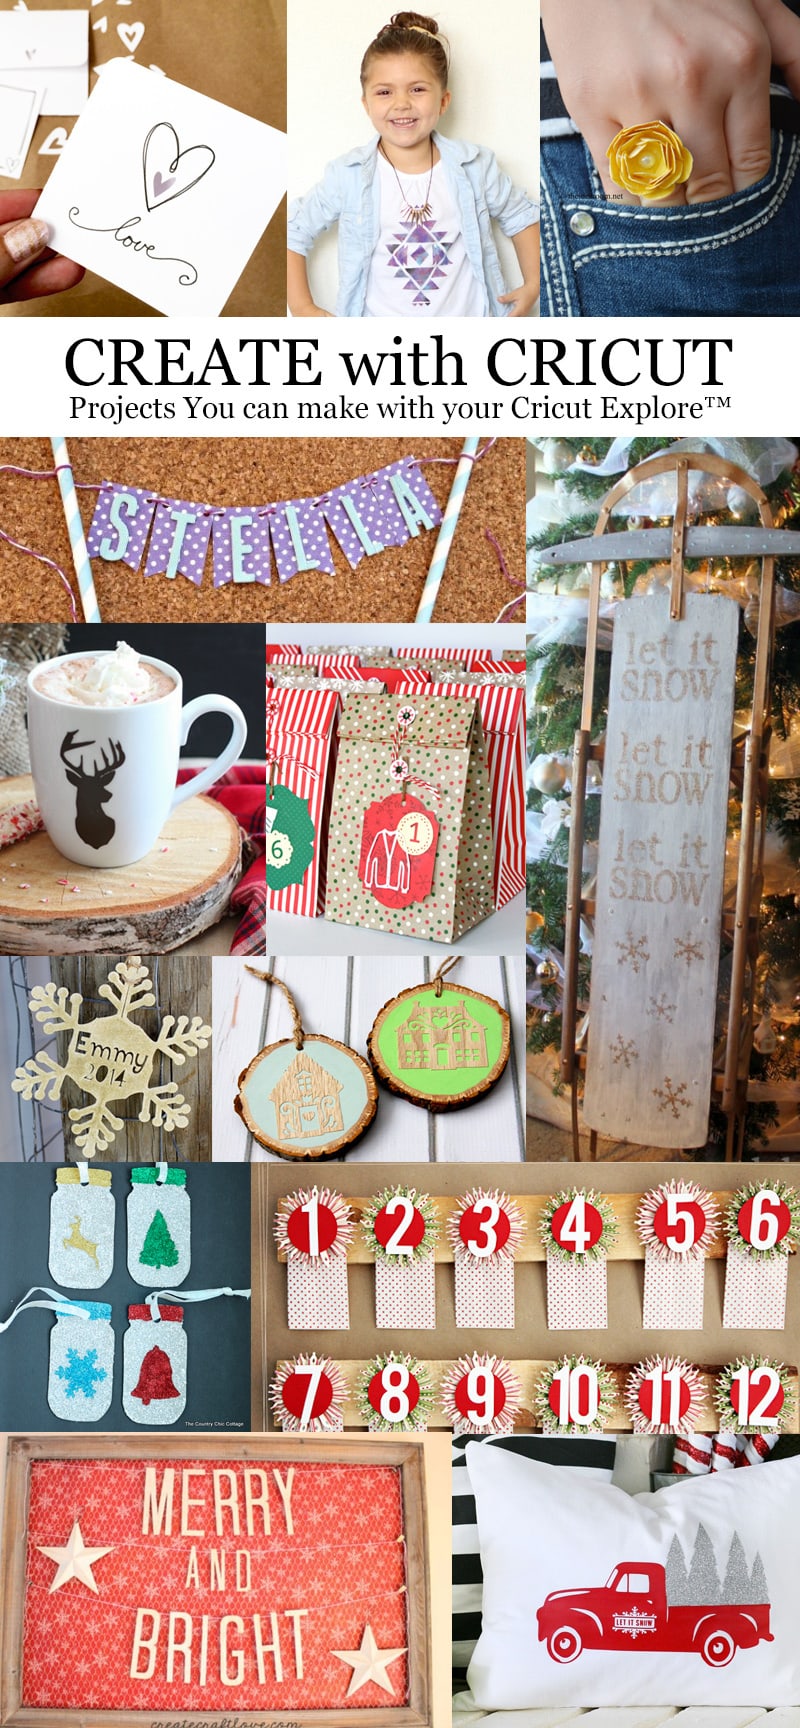 Project Ideas You can Create with your Cricut Explore